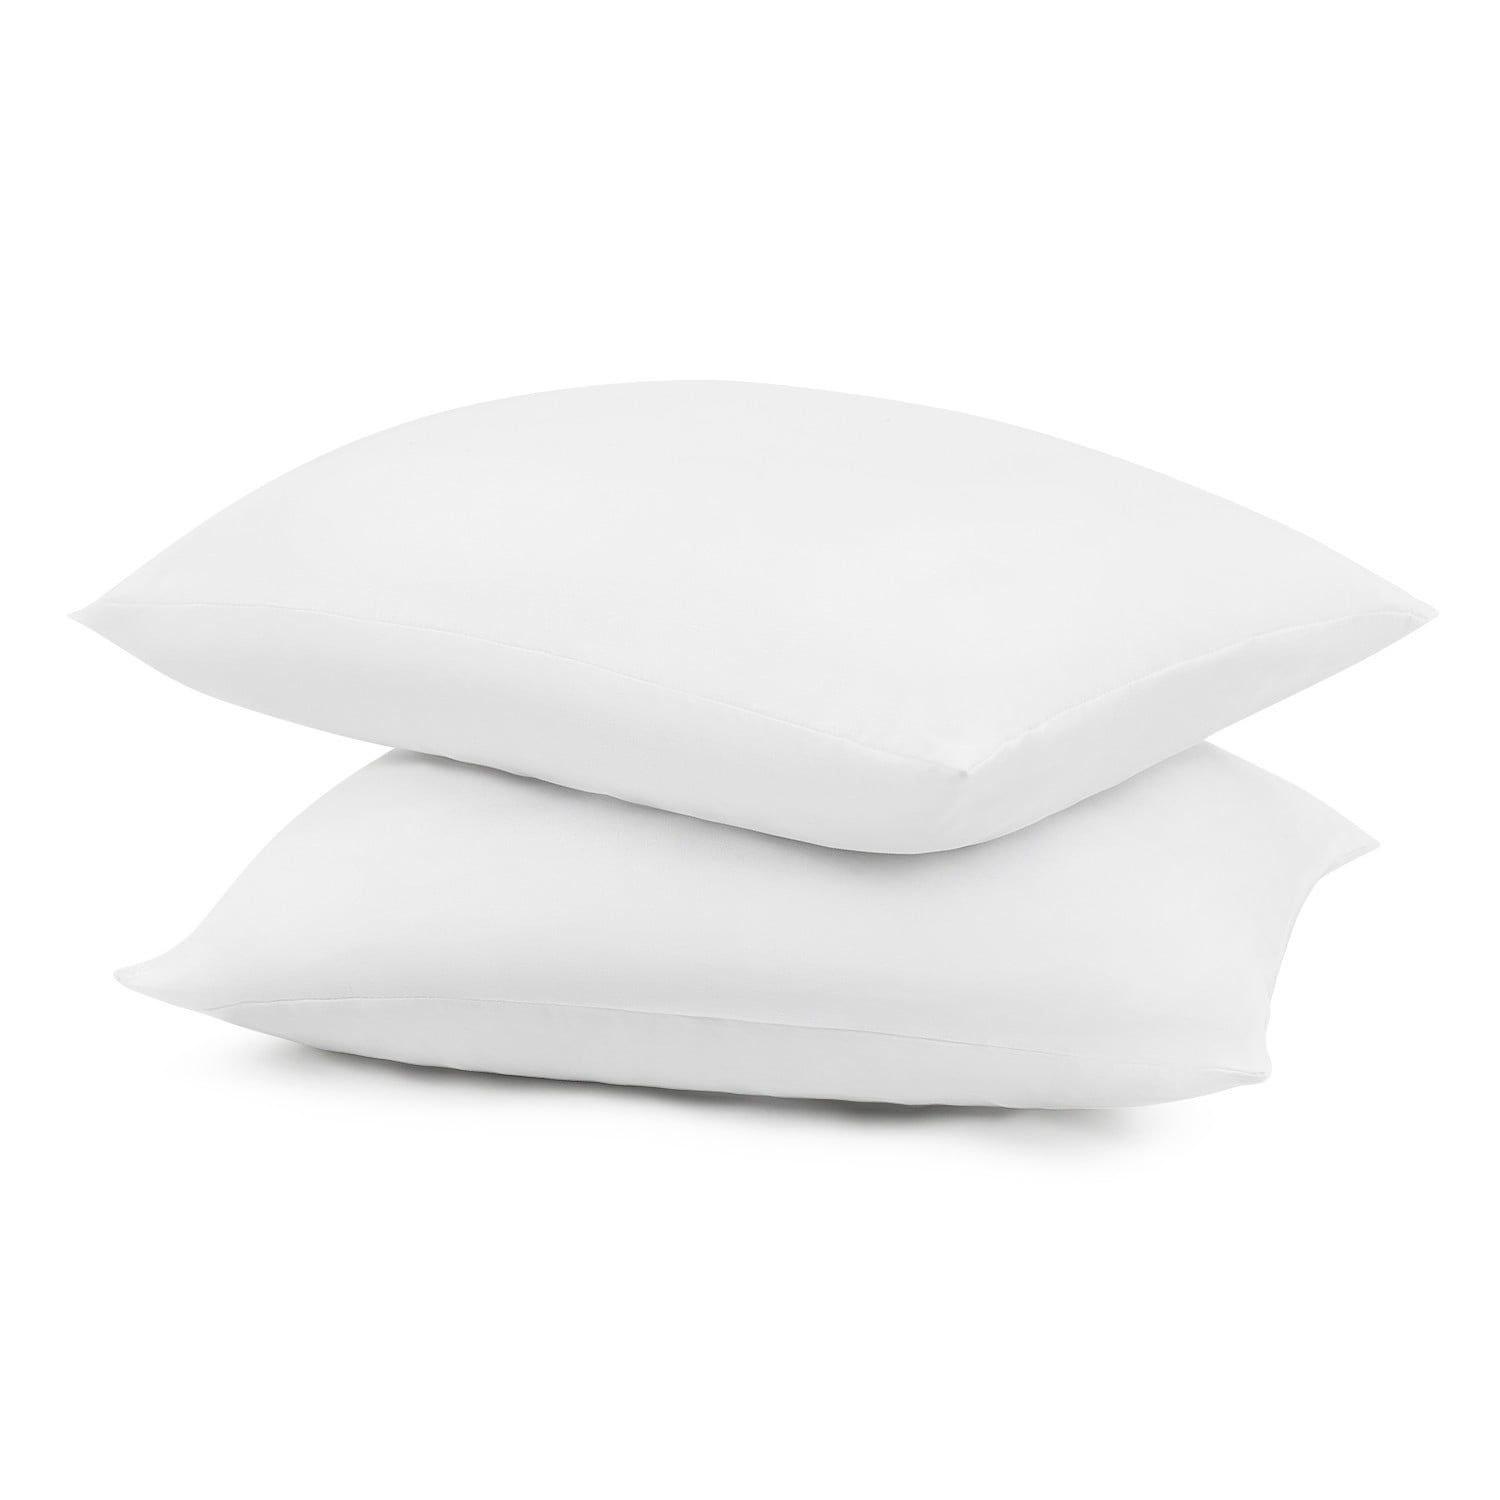 20 Single Pillow Insert for 18x18 Pillow Cover (pi20) - Mission